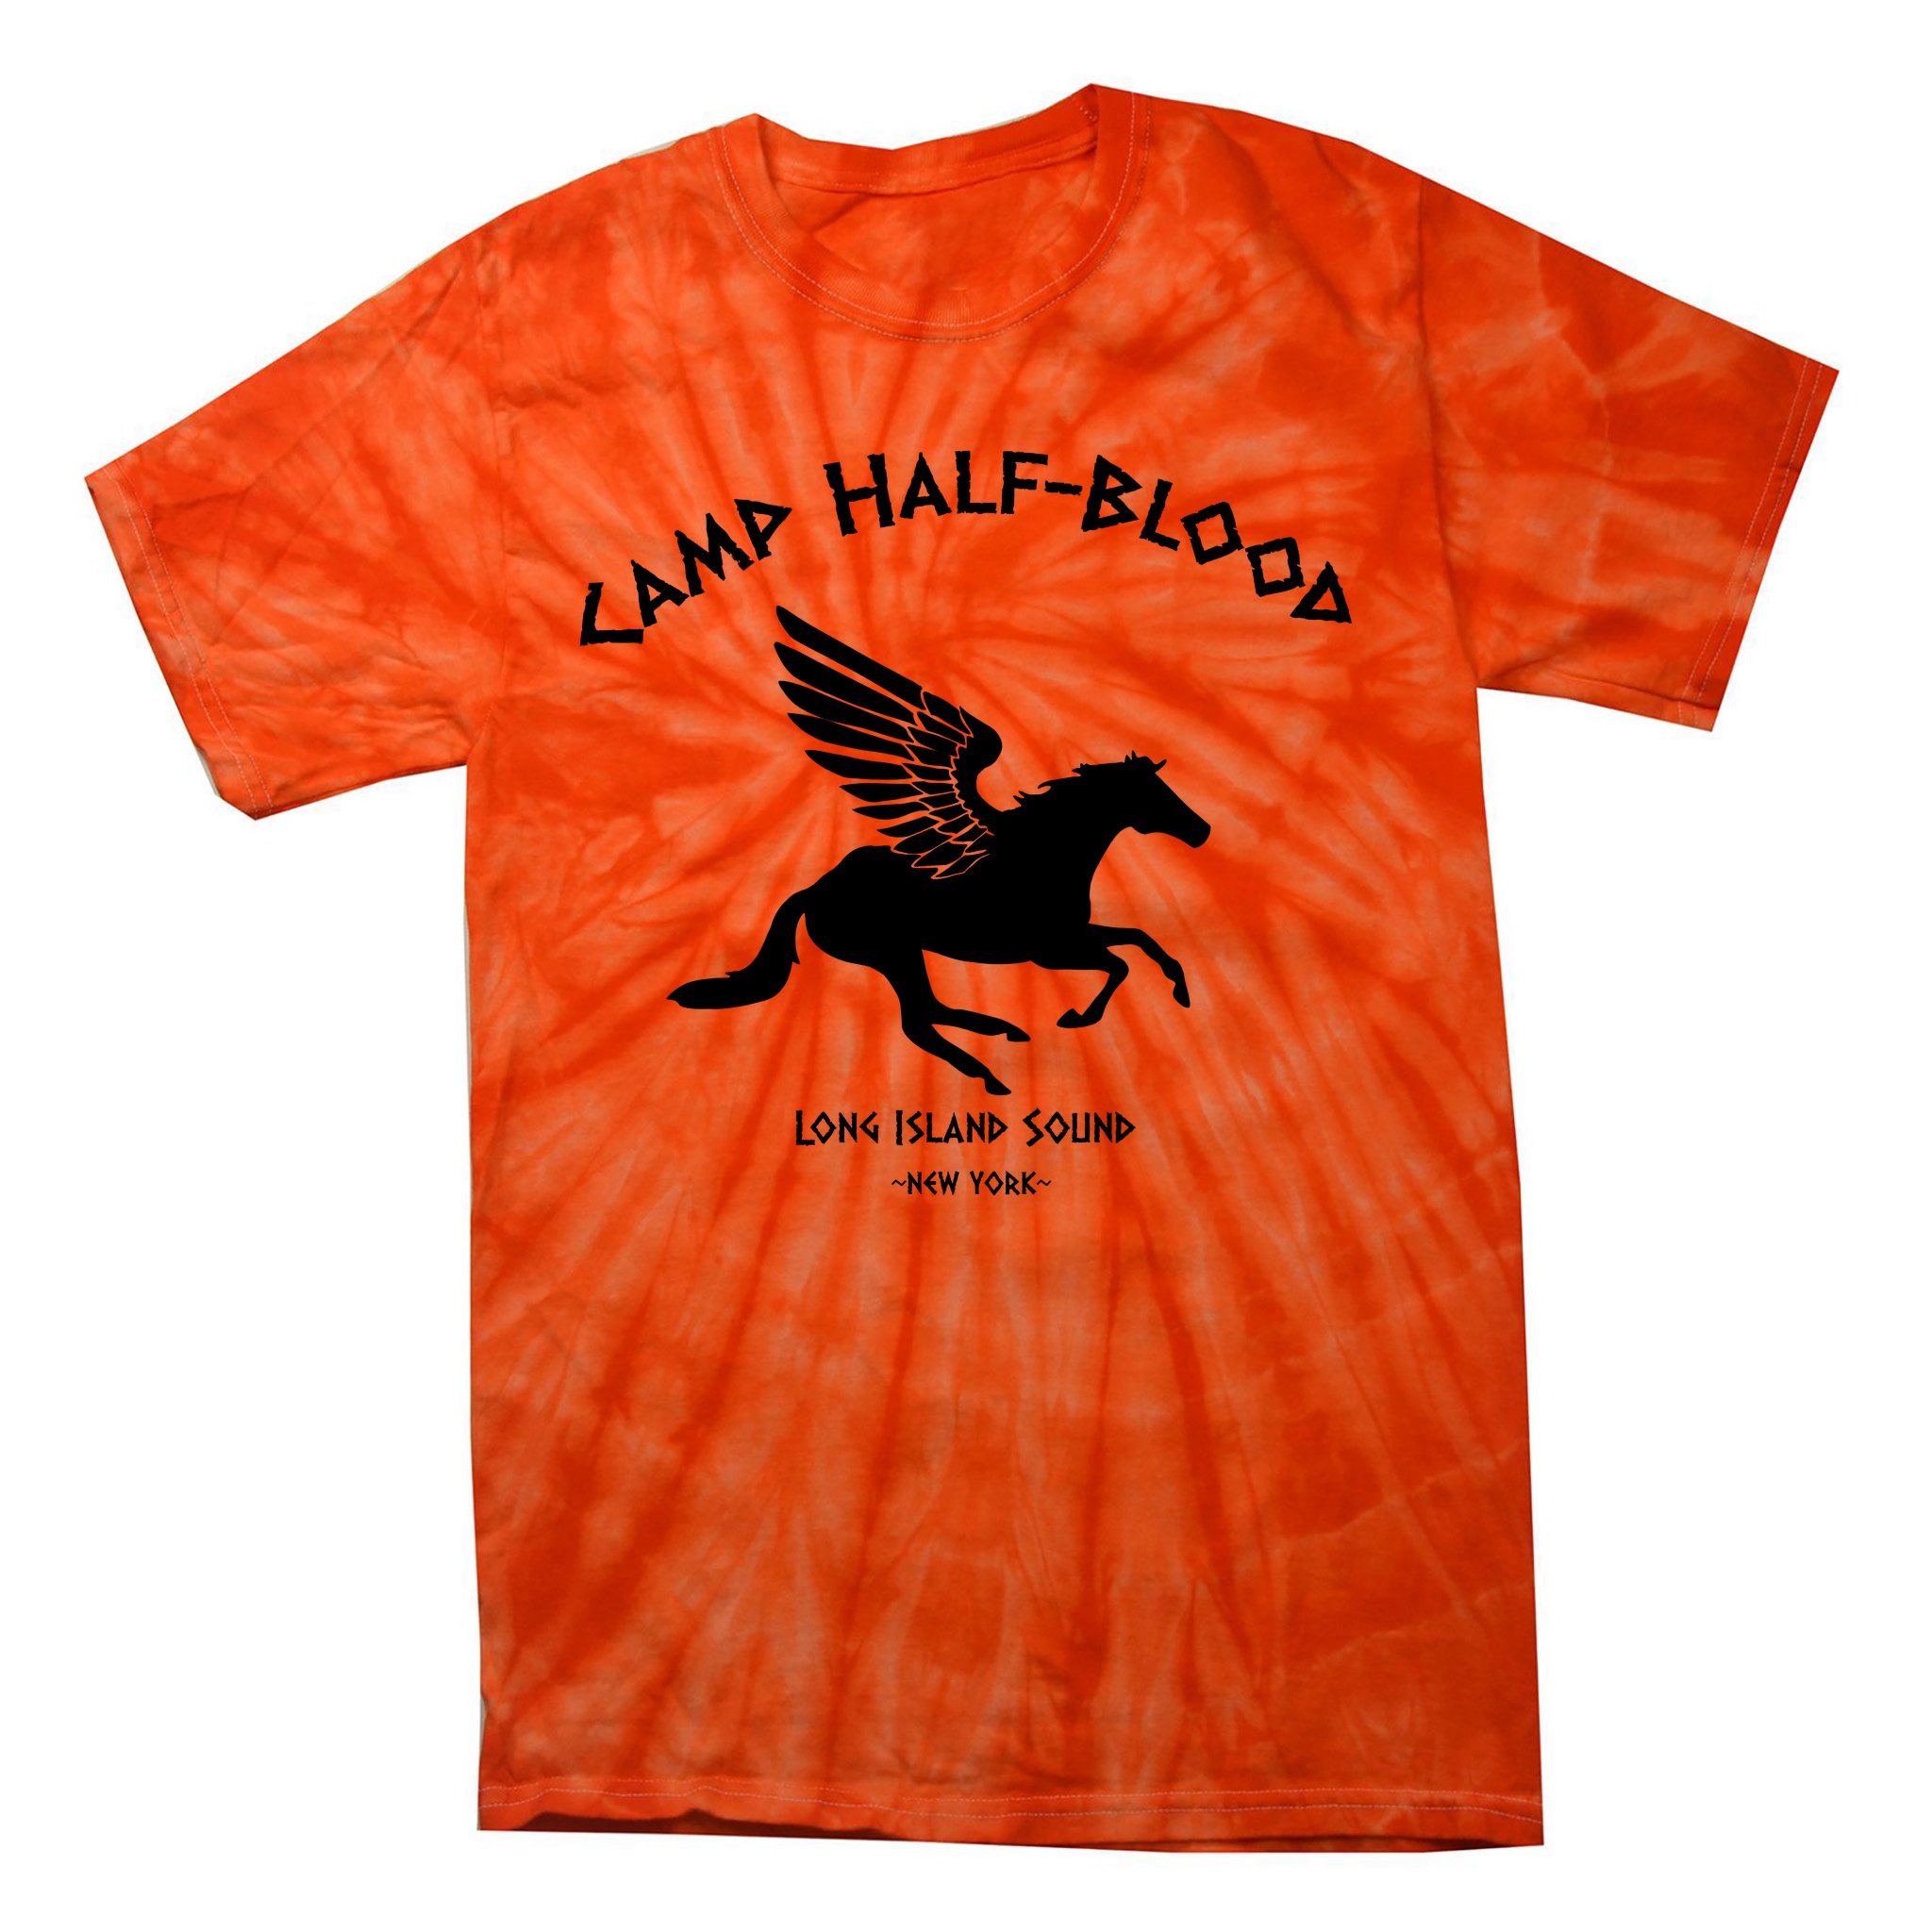 Cabin 13 Camp Half-Blood Essential T-Shirt for Sale by